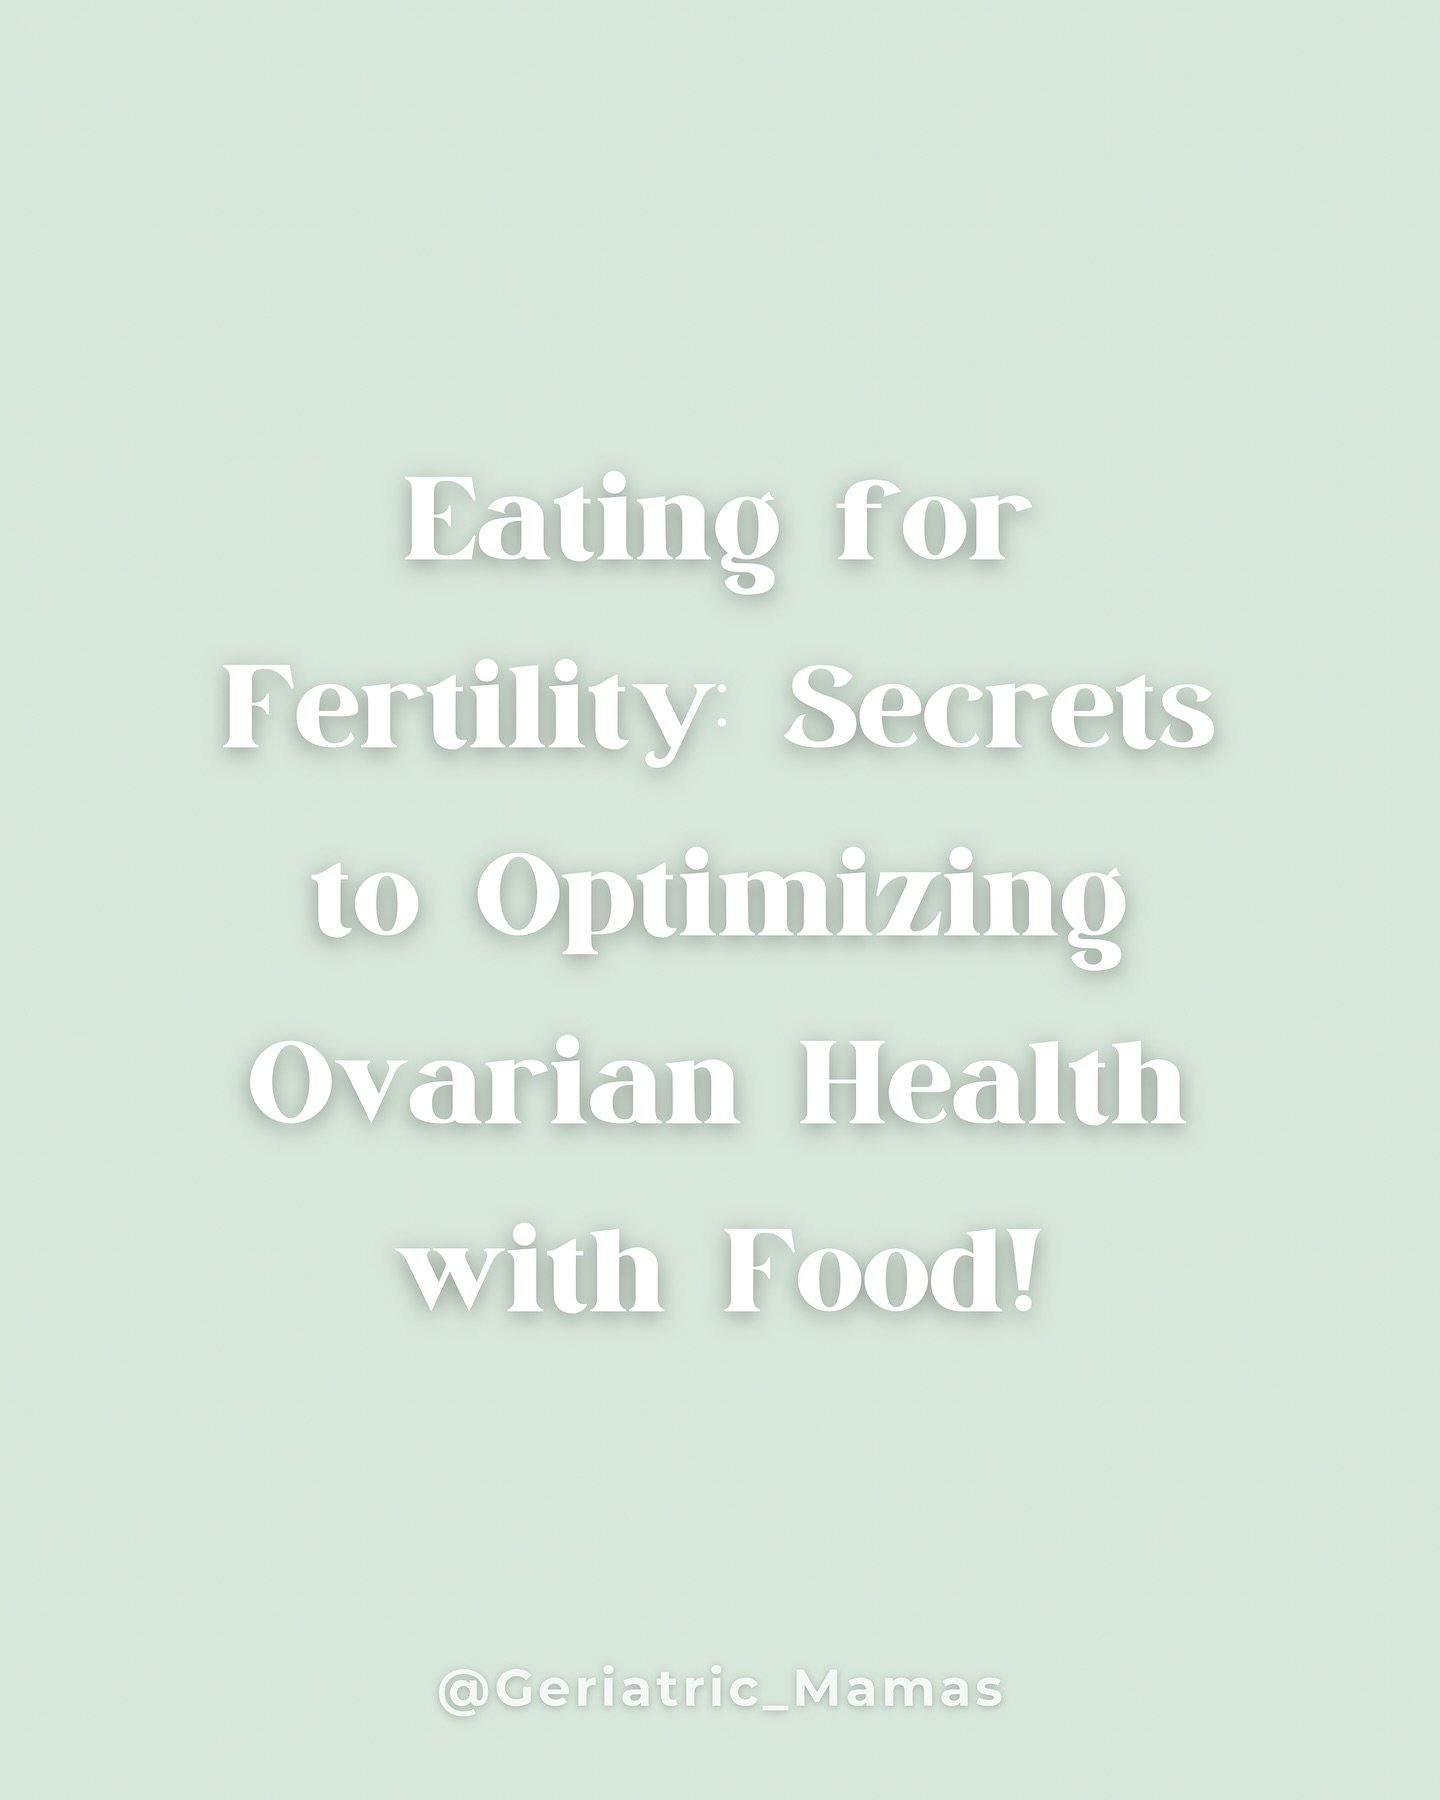 On today&rsquo;s episode, Sonia and Jessica discuss nutrients found in certain foods that can improve reproductive health, as well as which foods and substances to avoid while trying to conceive.  They also weigh-in on the Mediterranean diet and the 